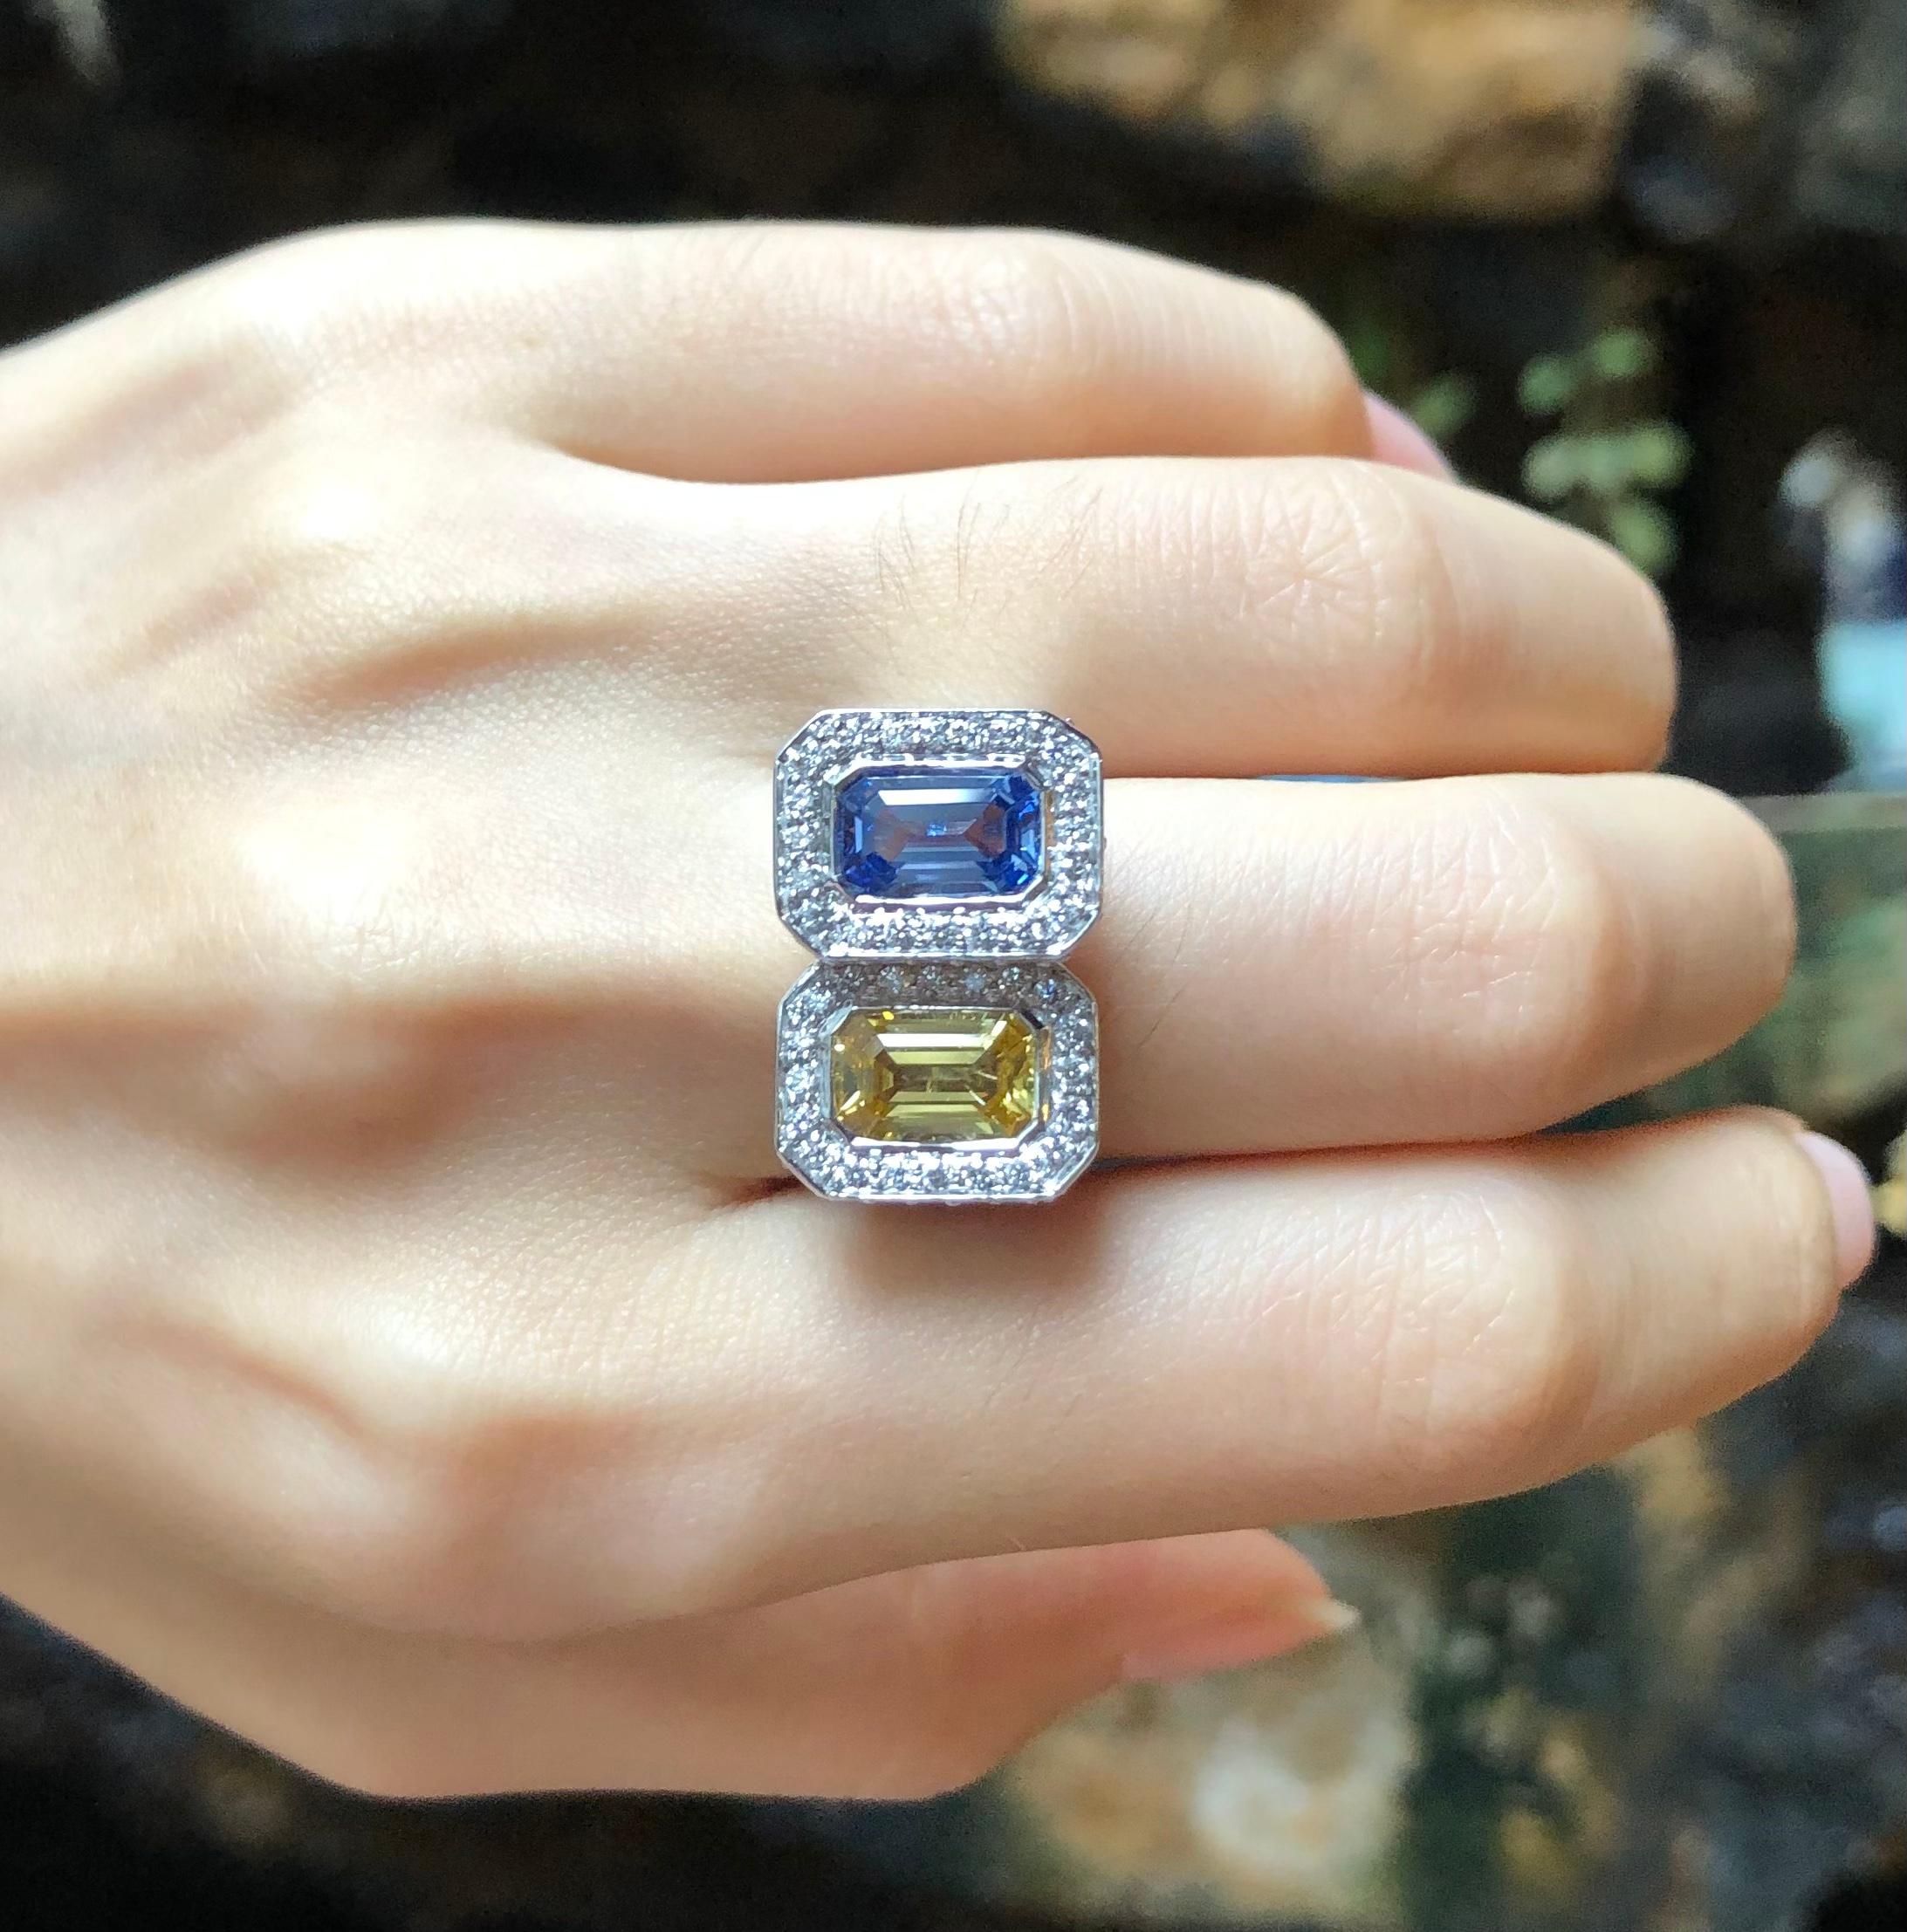 Blue Sapphire 1.89 carats and Yellow Sapphire 1.78 carats with Diamond 0.88 carat Ring set in 18 Karat White Gold Settings

Width:  2.2 cm 
Length:  1.3 cm
Ring Size: 51
Total Weight: 16.2 grams

